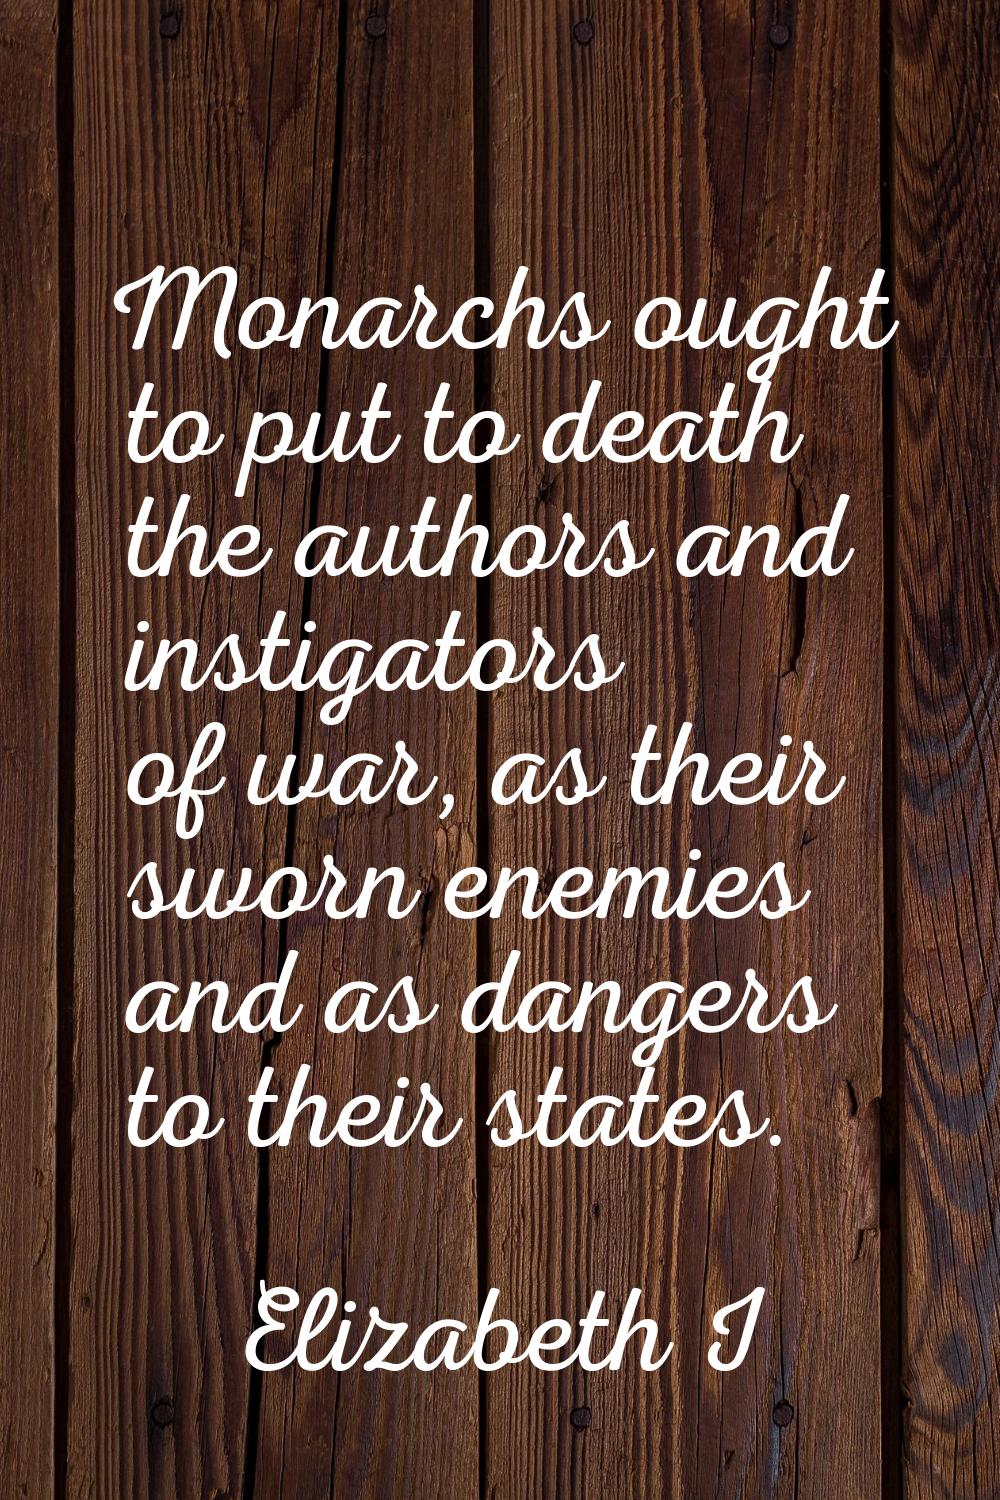 Monarchs ought to put to death the authors and instigators of war, as their sworn enemies and as da